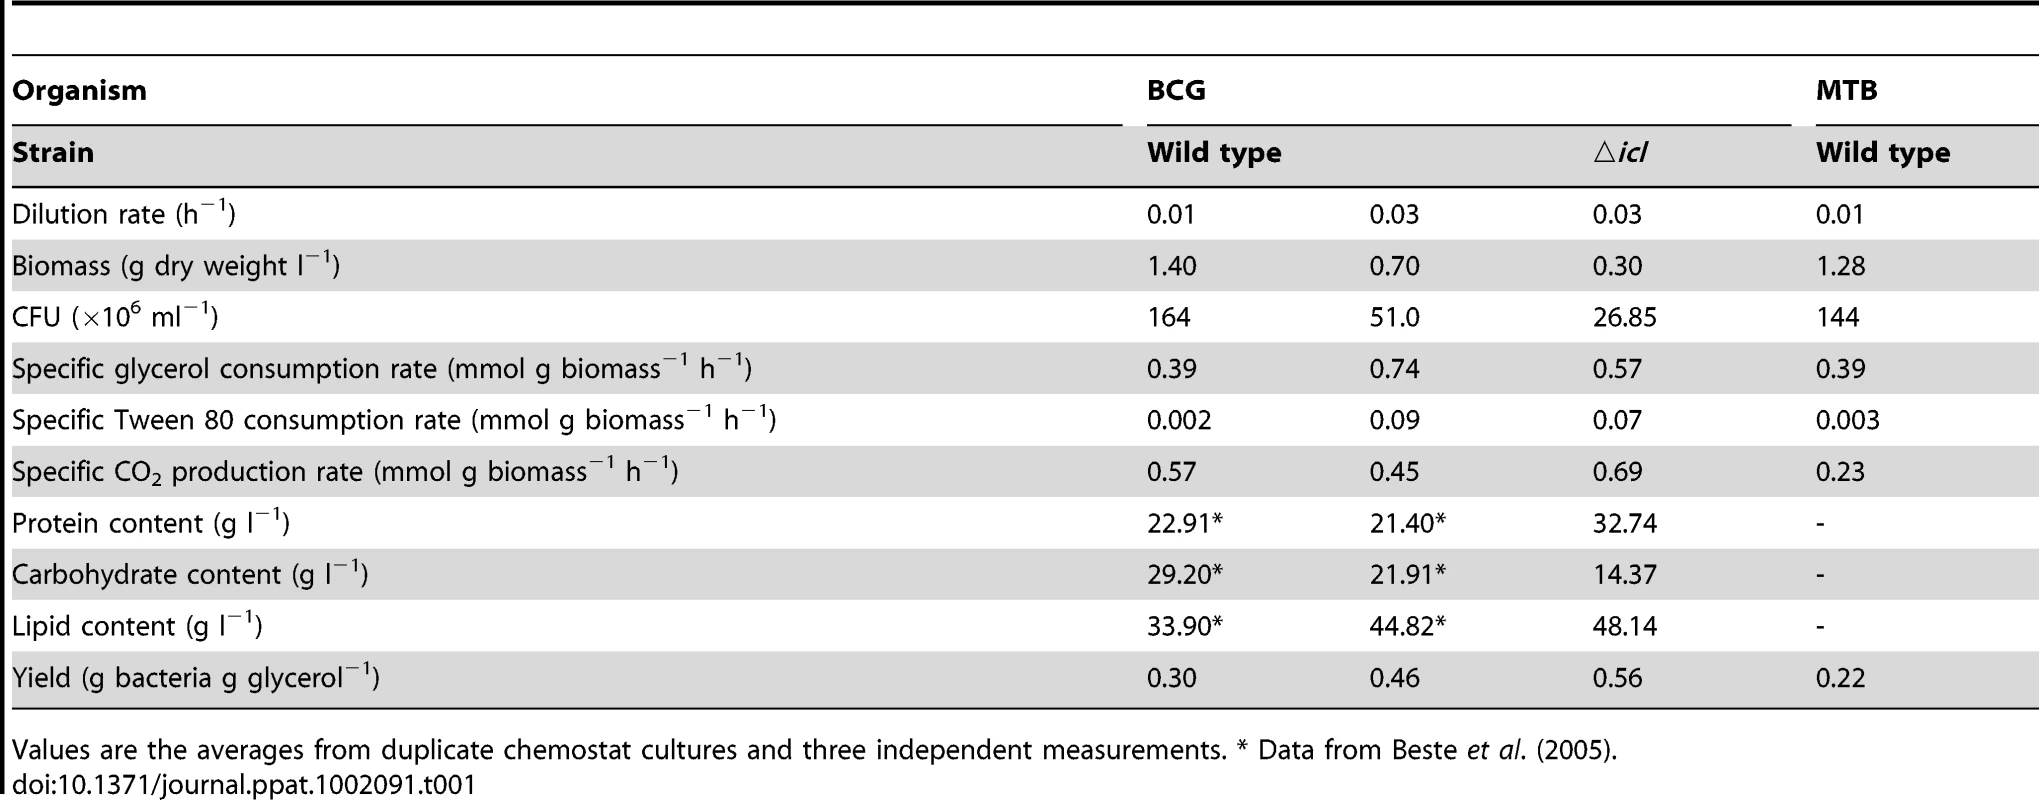 Steady state characteristics of wild type and ▵<i>icl</i> strains of <i>M.bovis</i> BCG (BCG) and wild type <i>M. tuberculosis</i> (MTB) grown in a glycerol-limited chemostat.